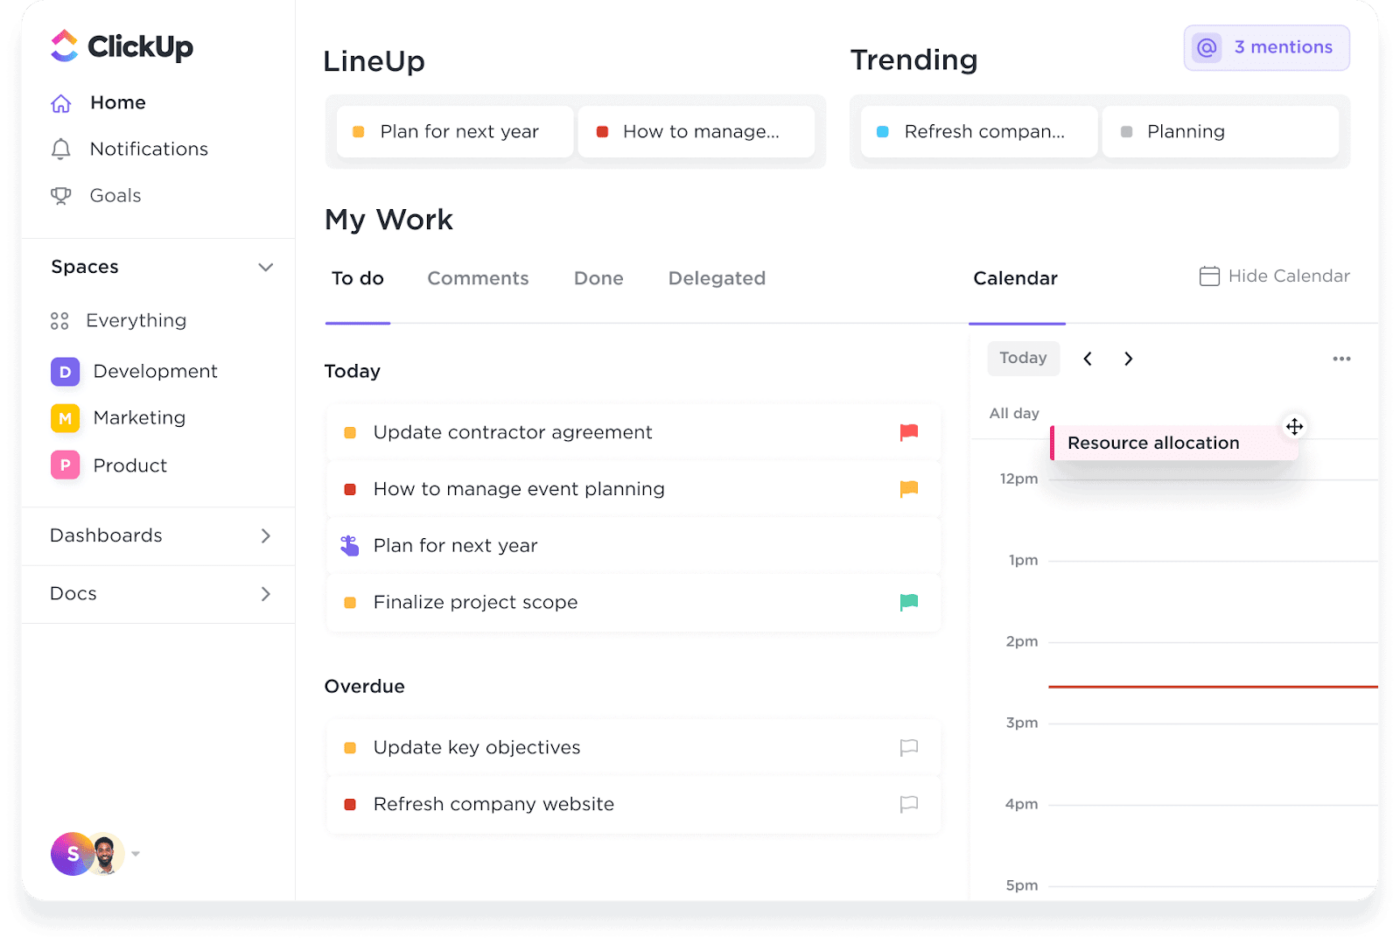 ClickUp's Personal Project Management Software